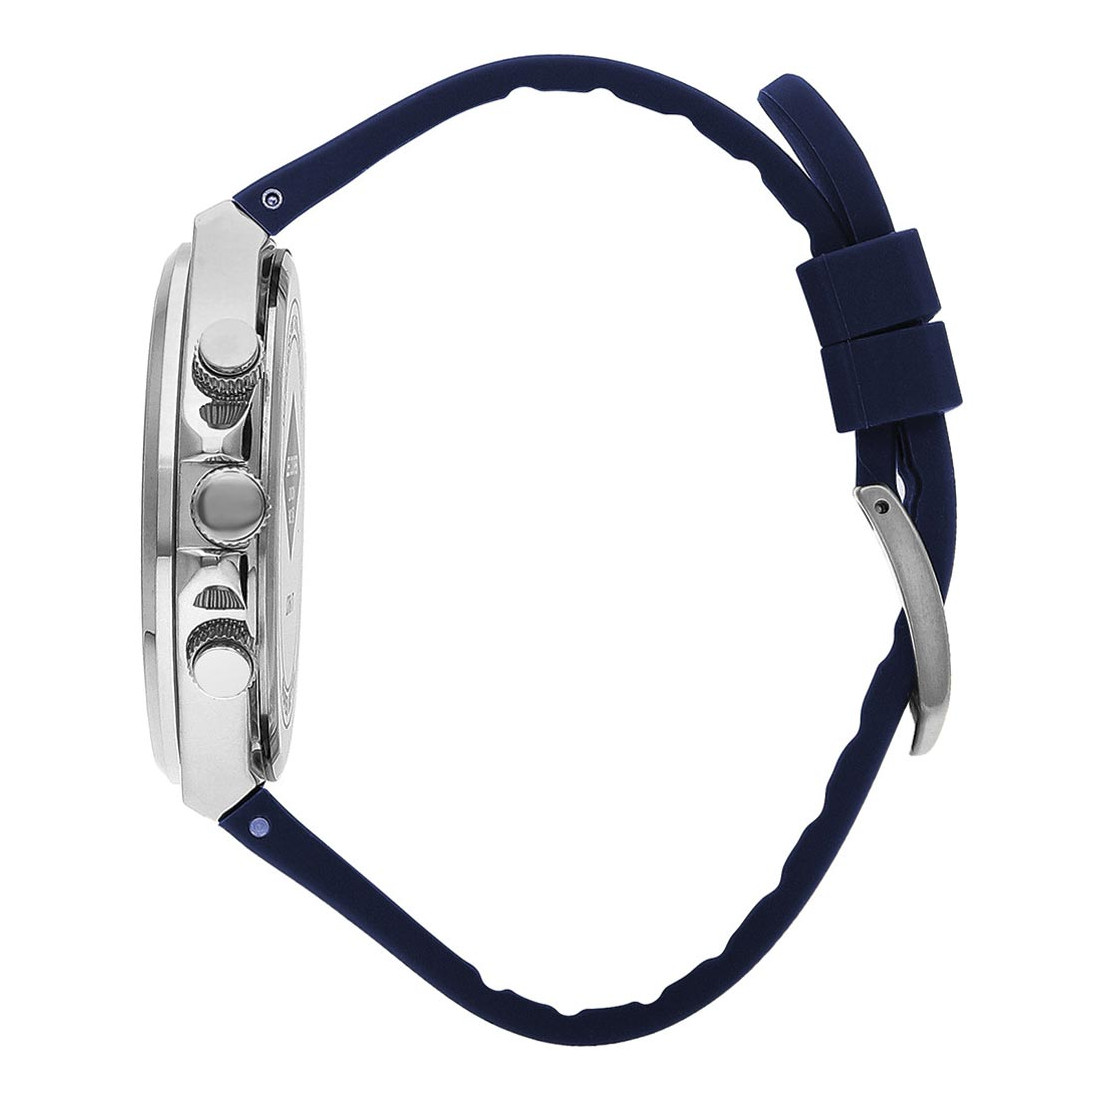 LEE COOPER-Multifunction Blue Silicone Strap-Ατσάλι